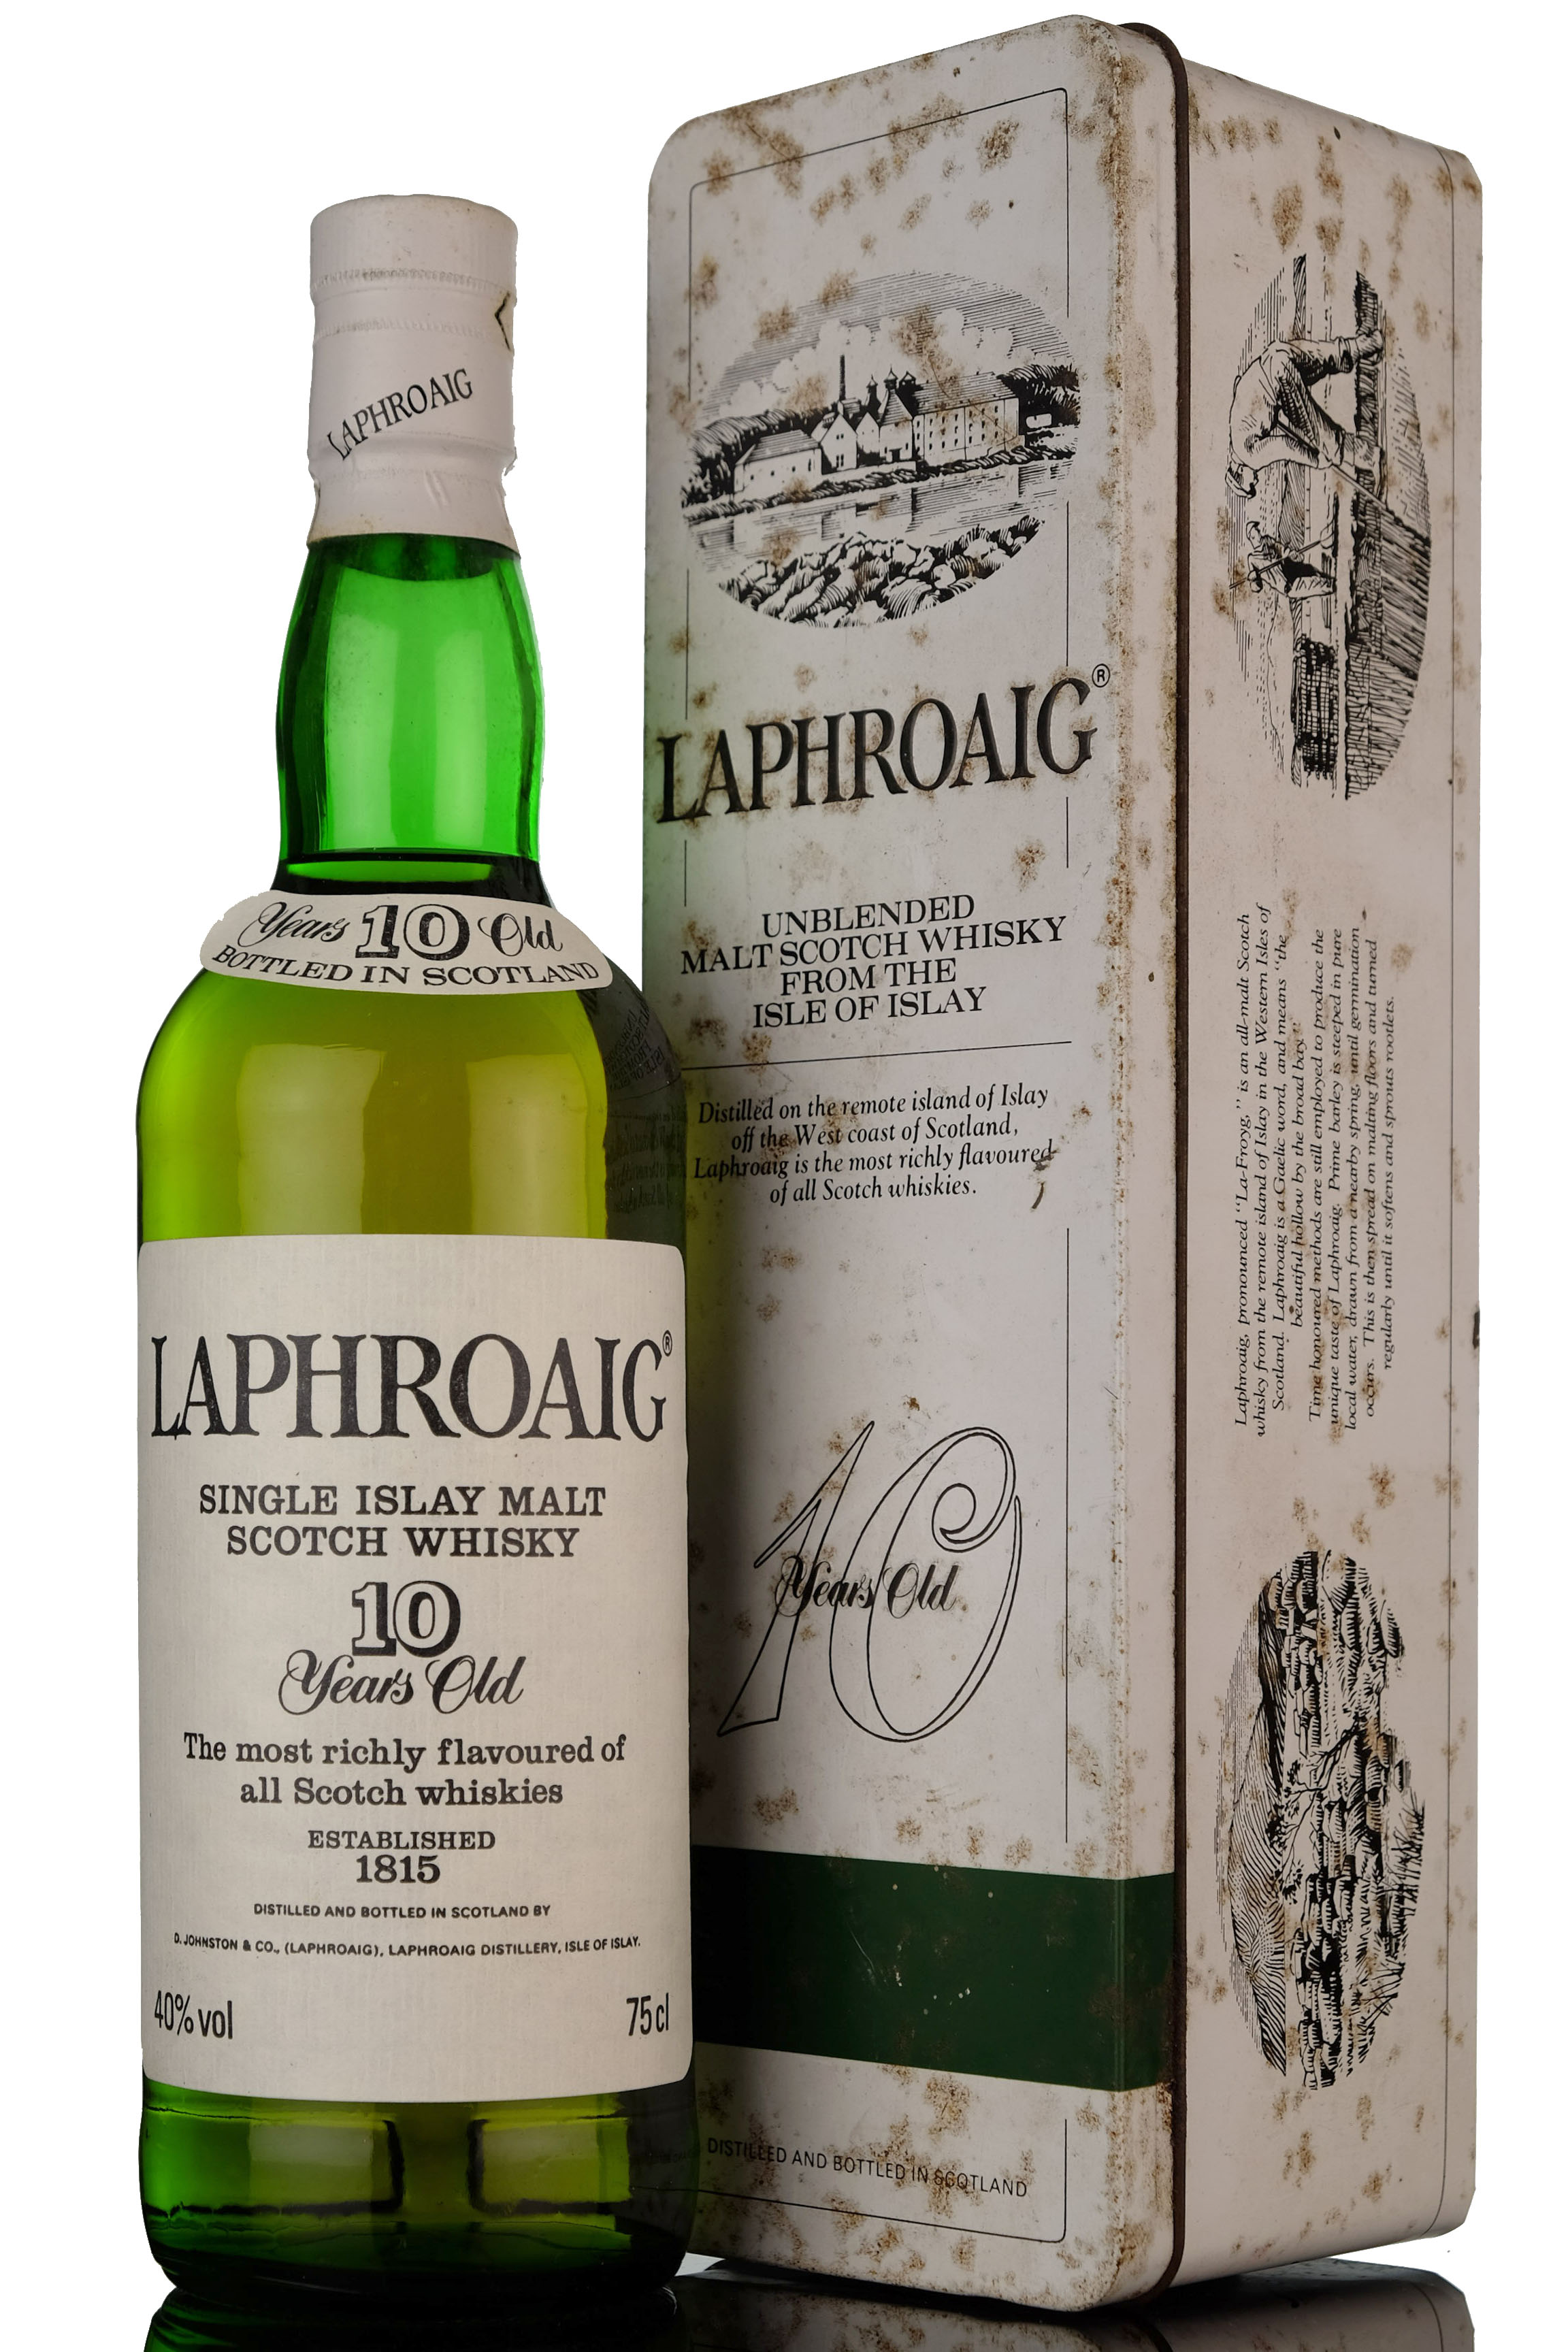 Laphroaig 10 Year Old - Late 1980s